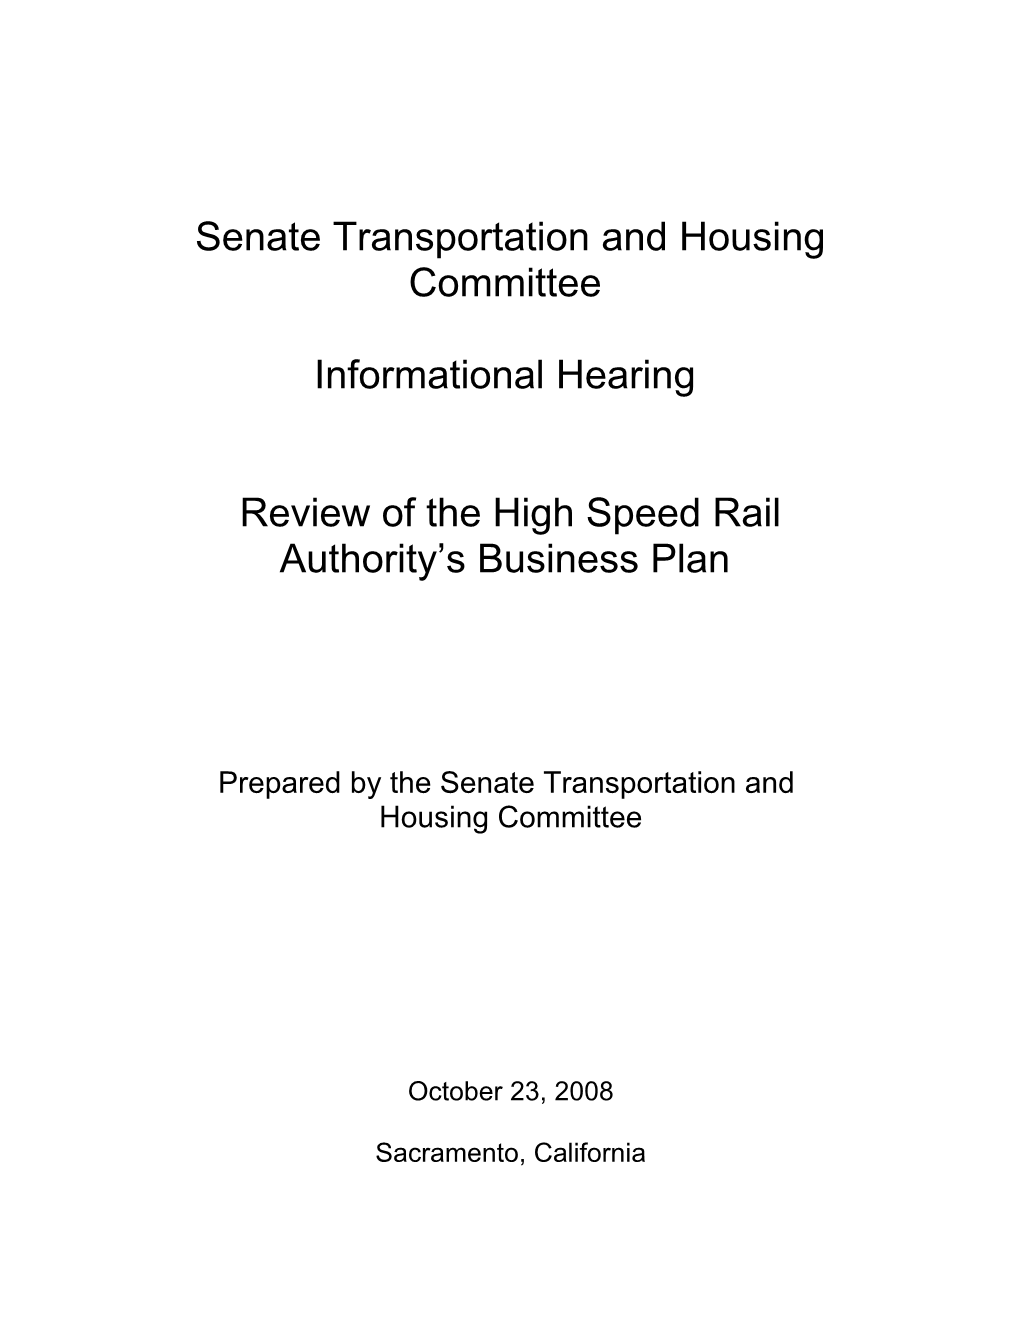 The Focus of Today S Hearing Is the Status of the California S High-Speed Rail Authority